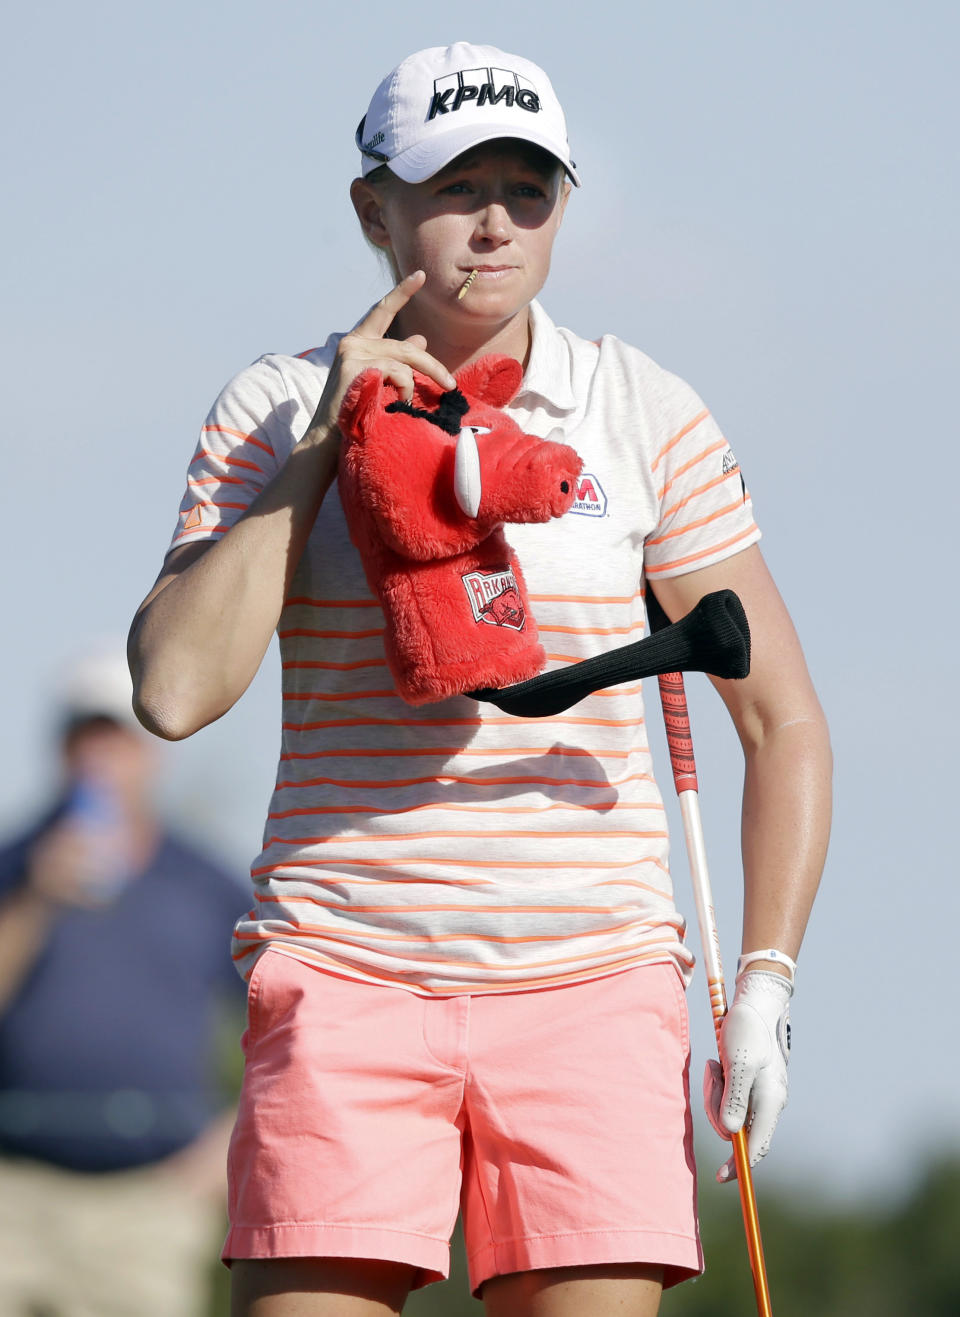 Stacy Lewis prepares for her tee shot on the ninth hole during the second round of the North Texas LPGA Shootout golf tournament at Las Colinas Country Club in Irving, Texas, Friday, May 2, 2014. (AP Photo/LM Otero)